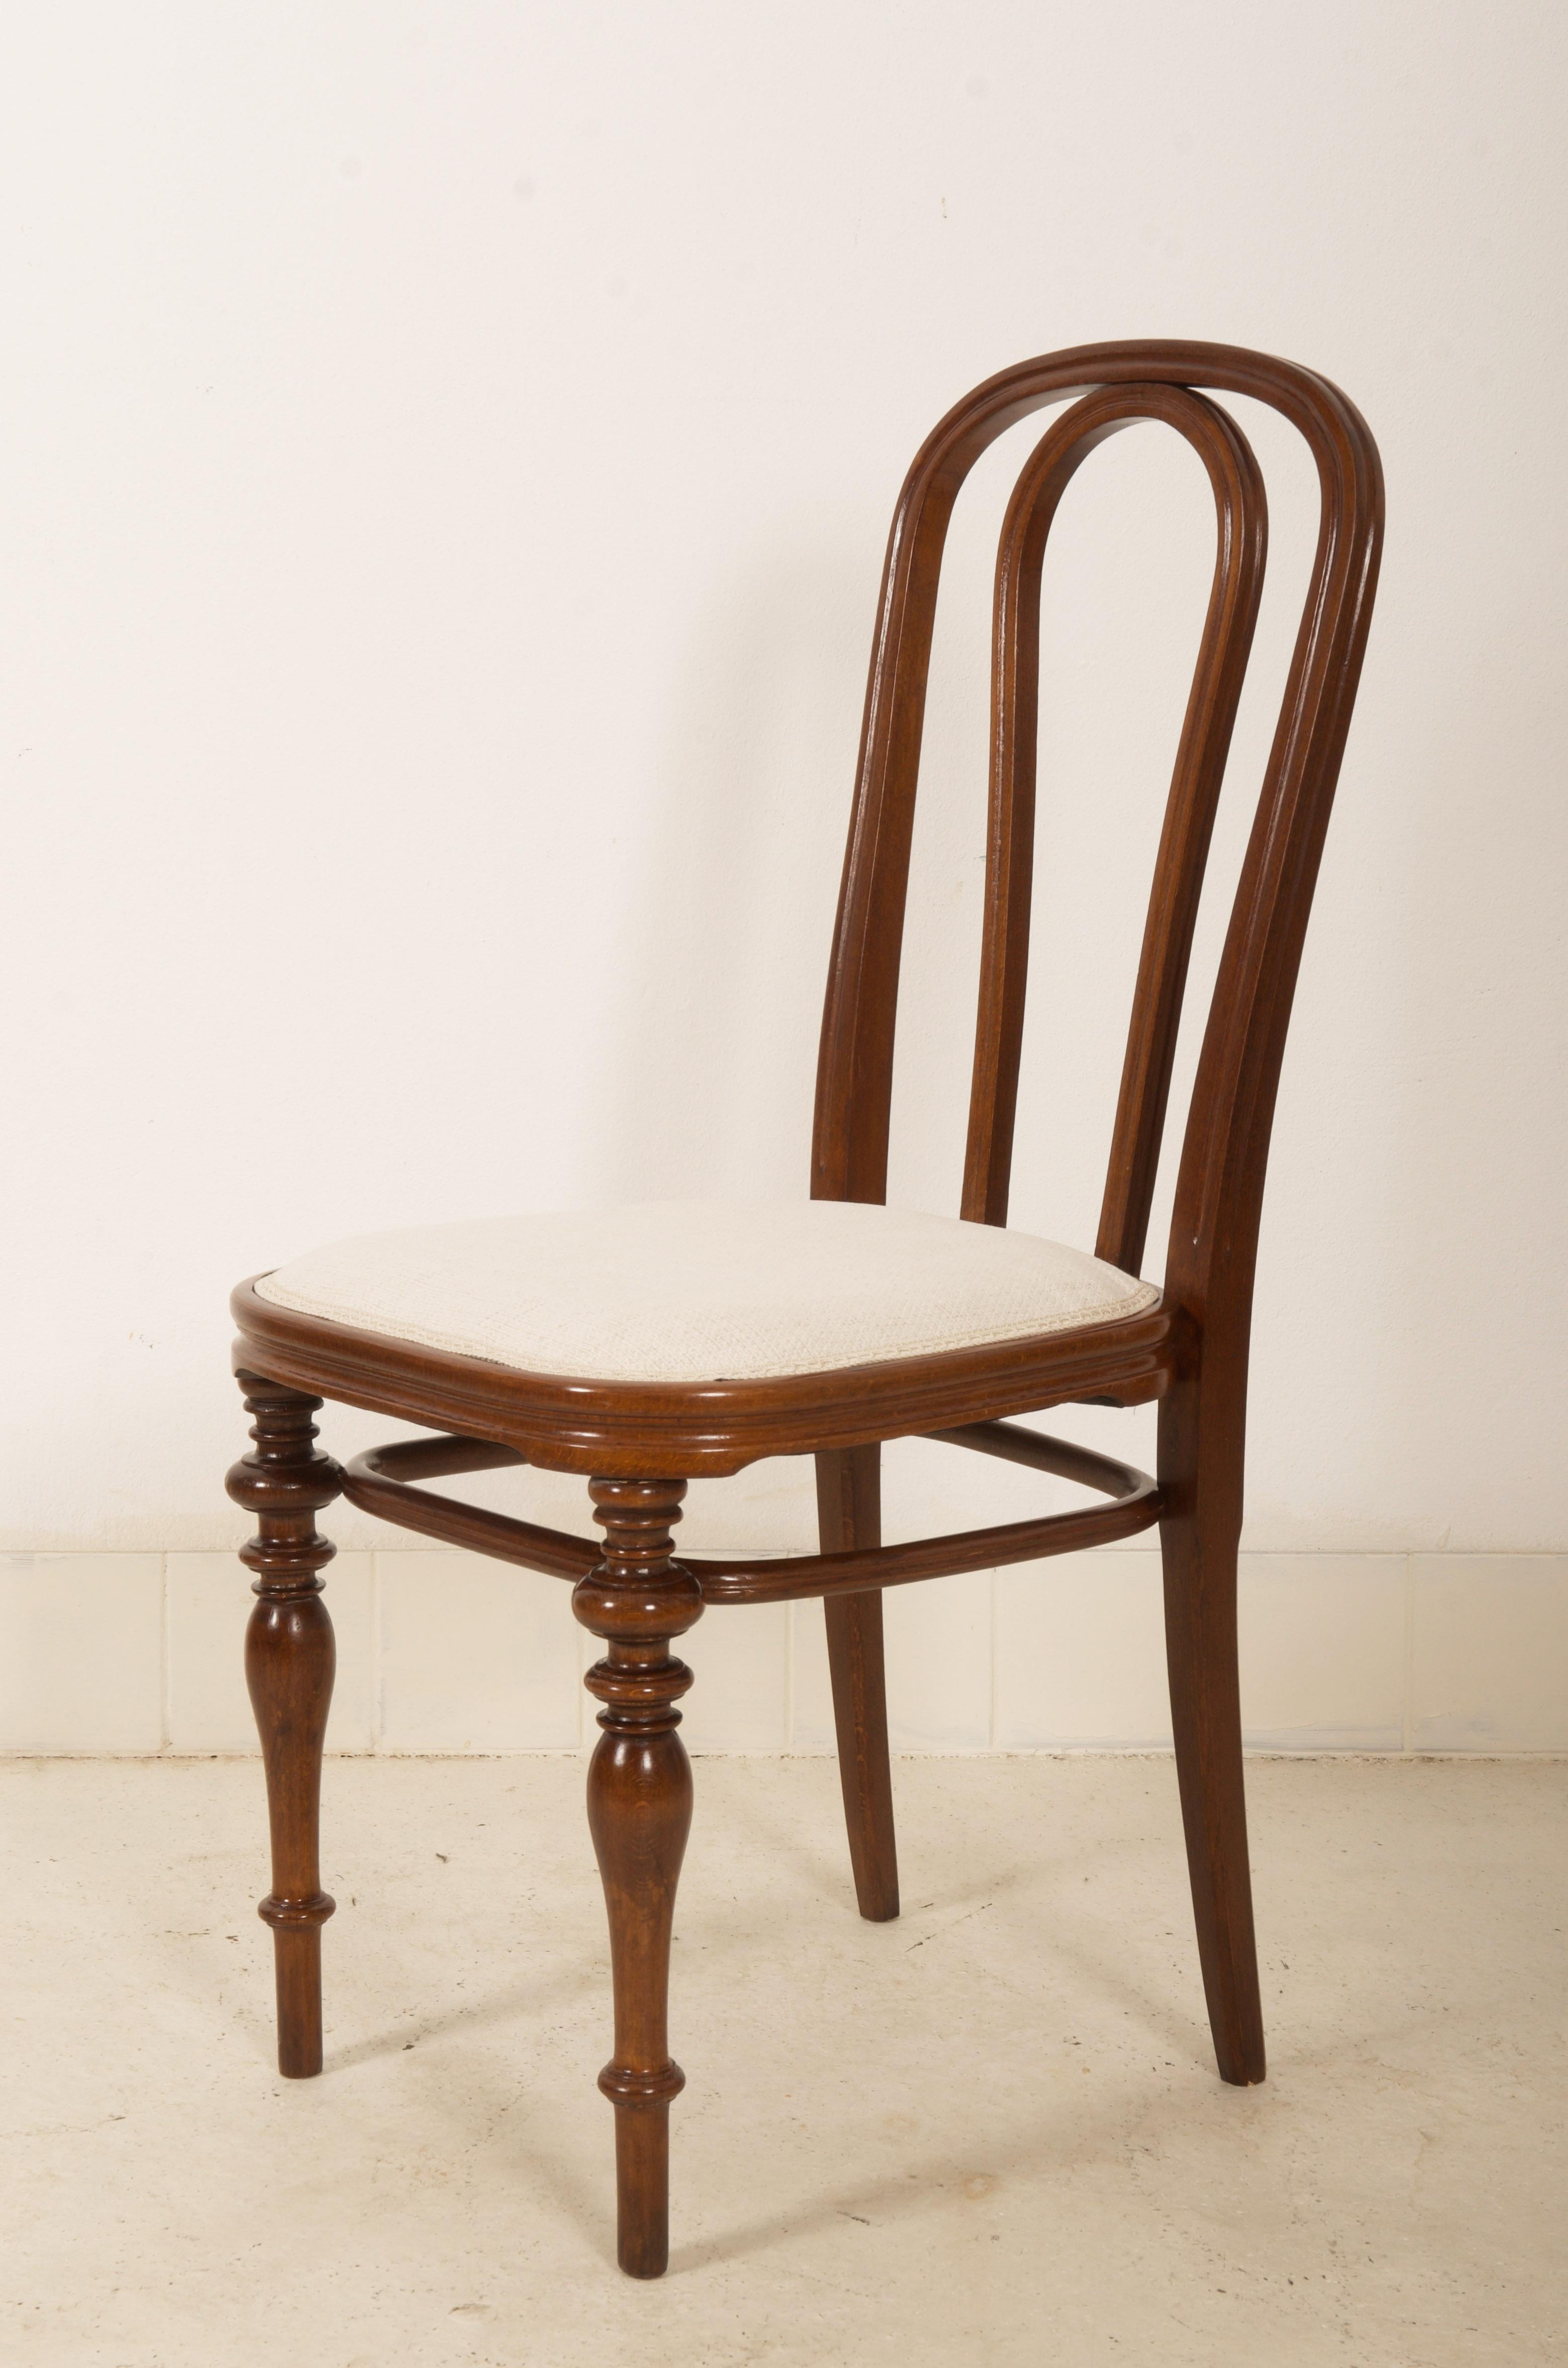 Beech bentwood frame with upholsterd seat. Manufactured by Thonet in Austria about 1880. 